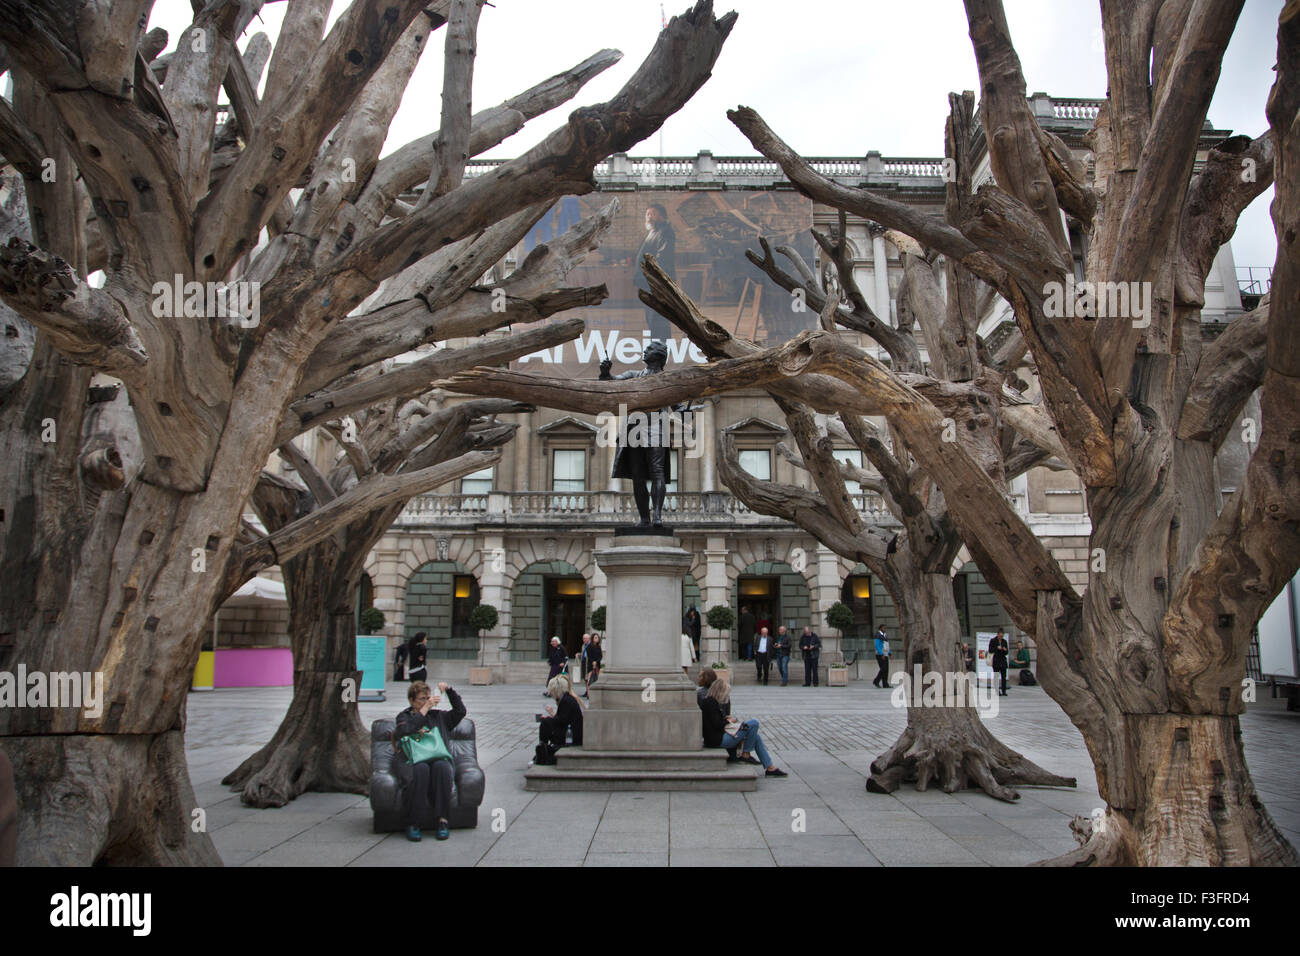 Chinese artist Ai Weiwei new exhibition with Tree sculptures in the courtyard of London's Royal Academy, Piccadilly, London, UK Stock Photo